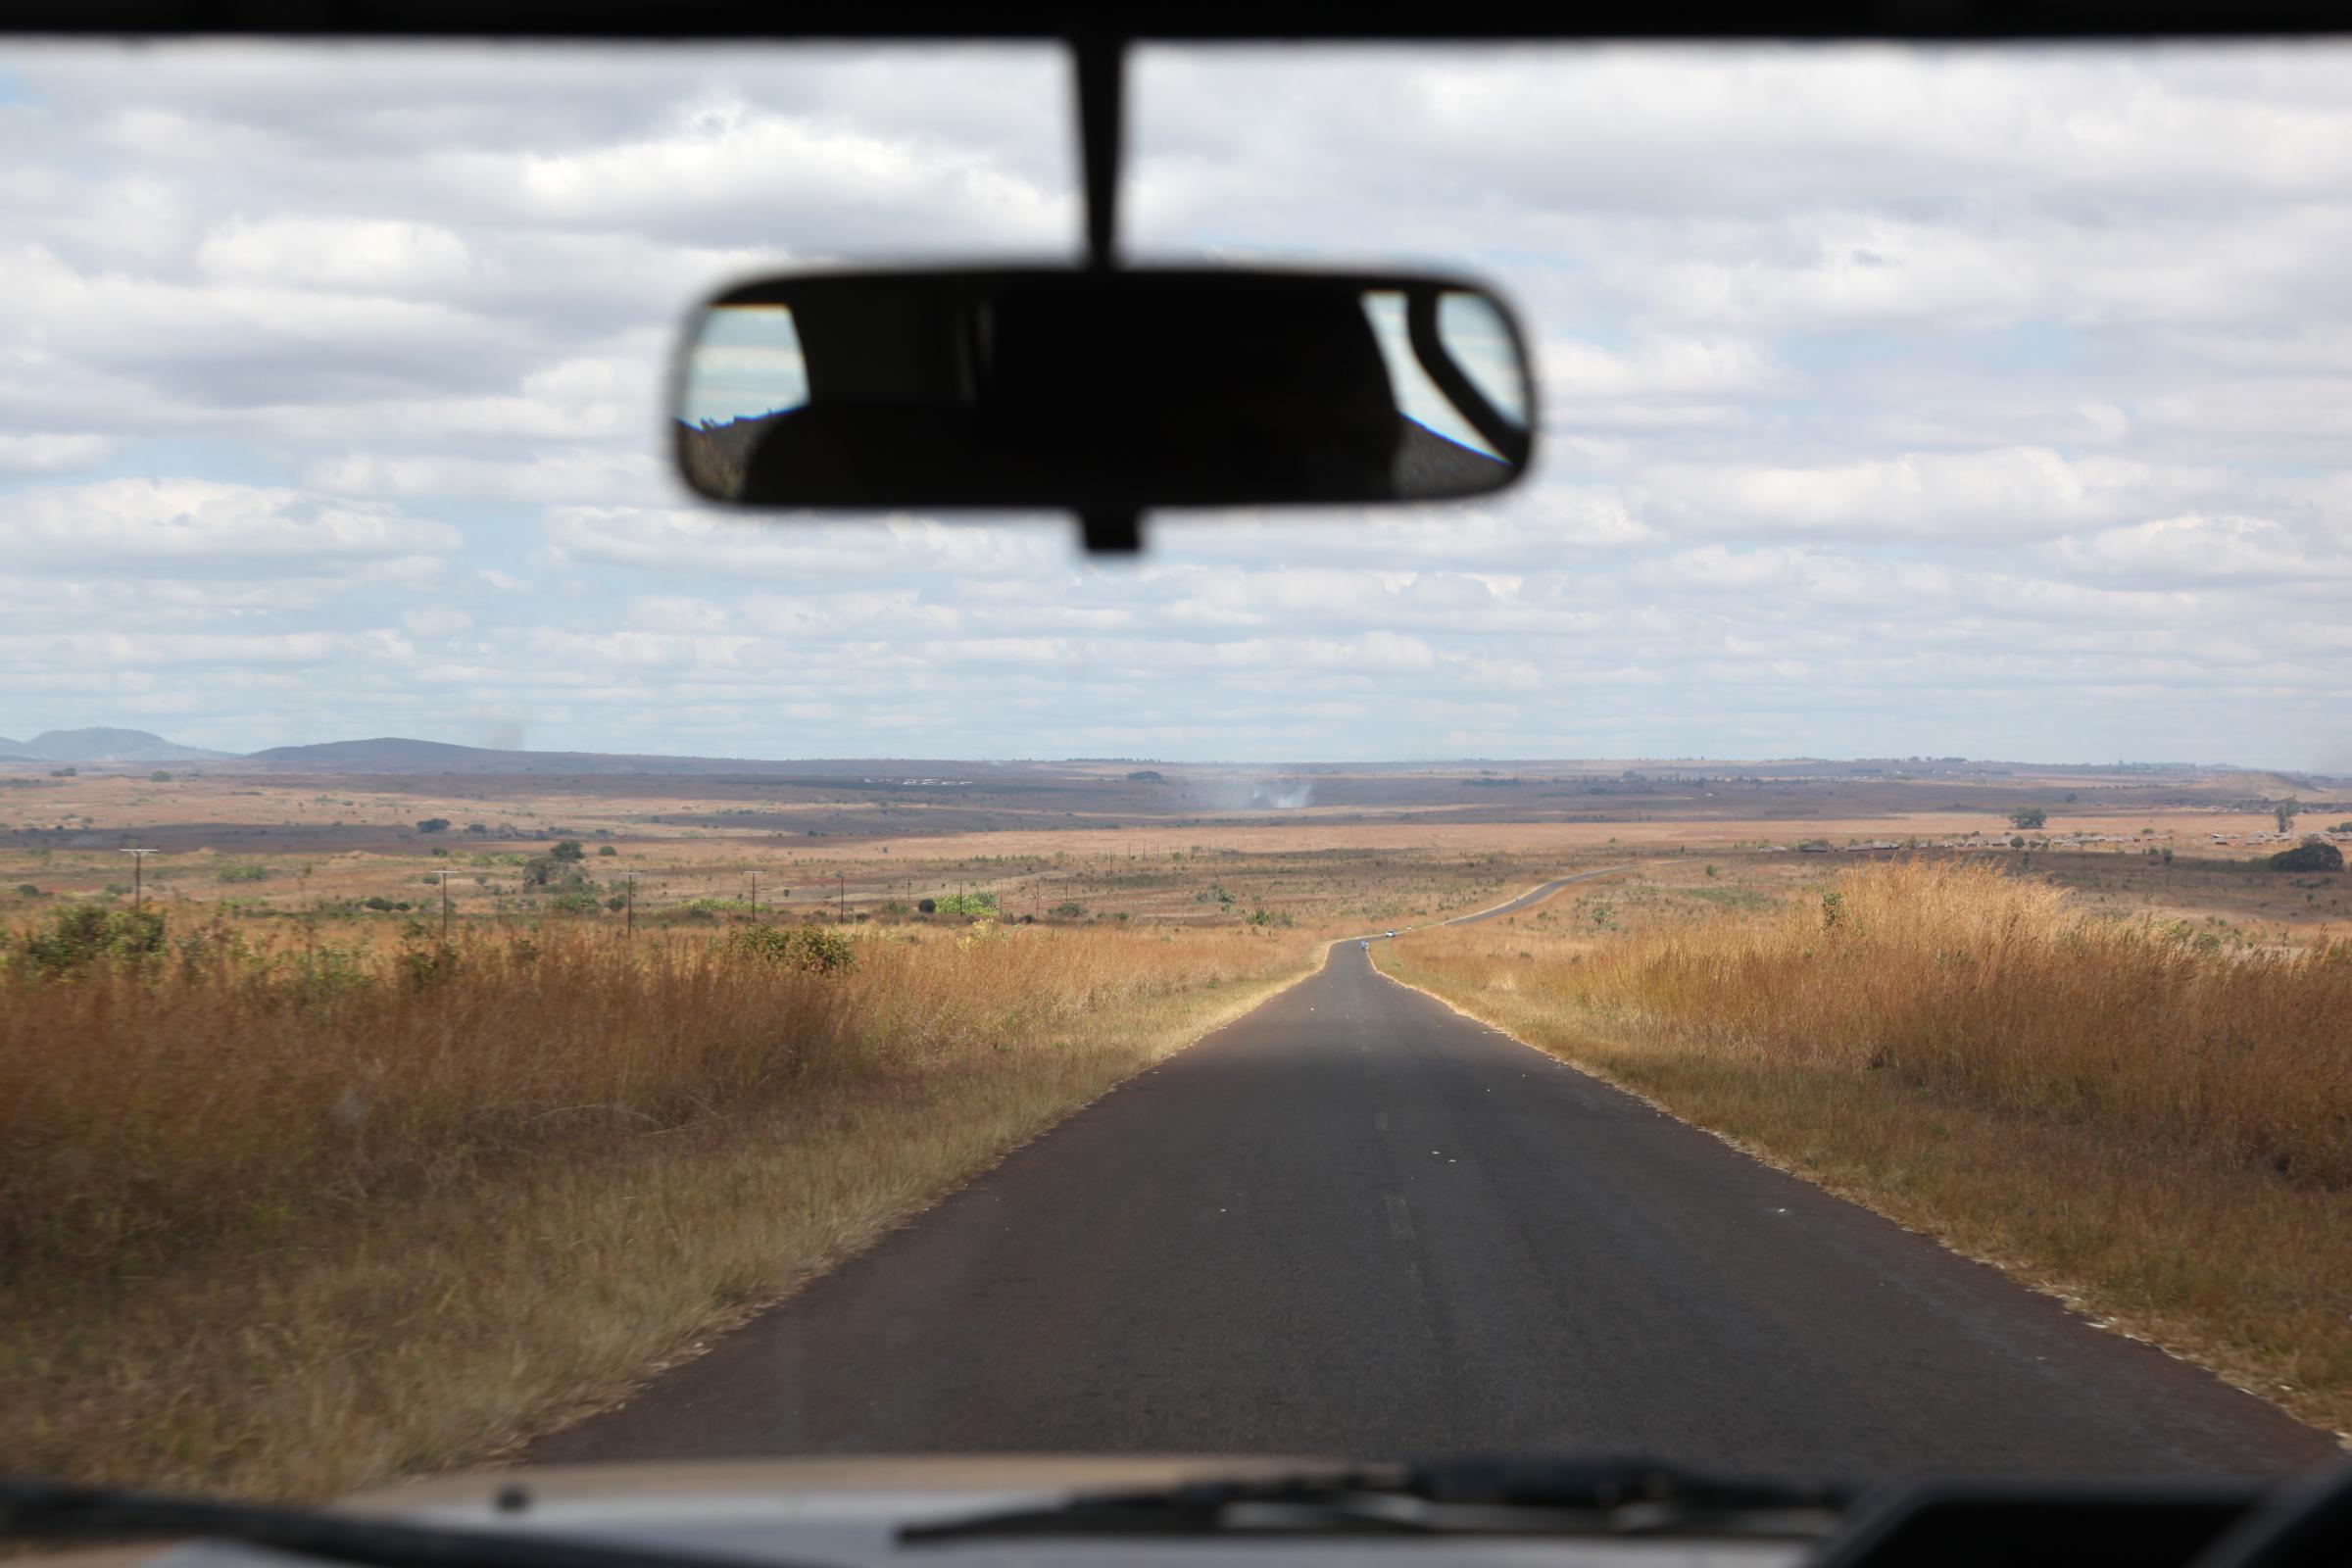 Road - Mozambique, 27 of July, 2009
Niassa Province.
Photo by...